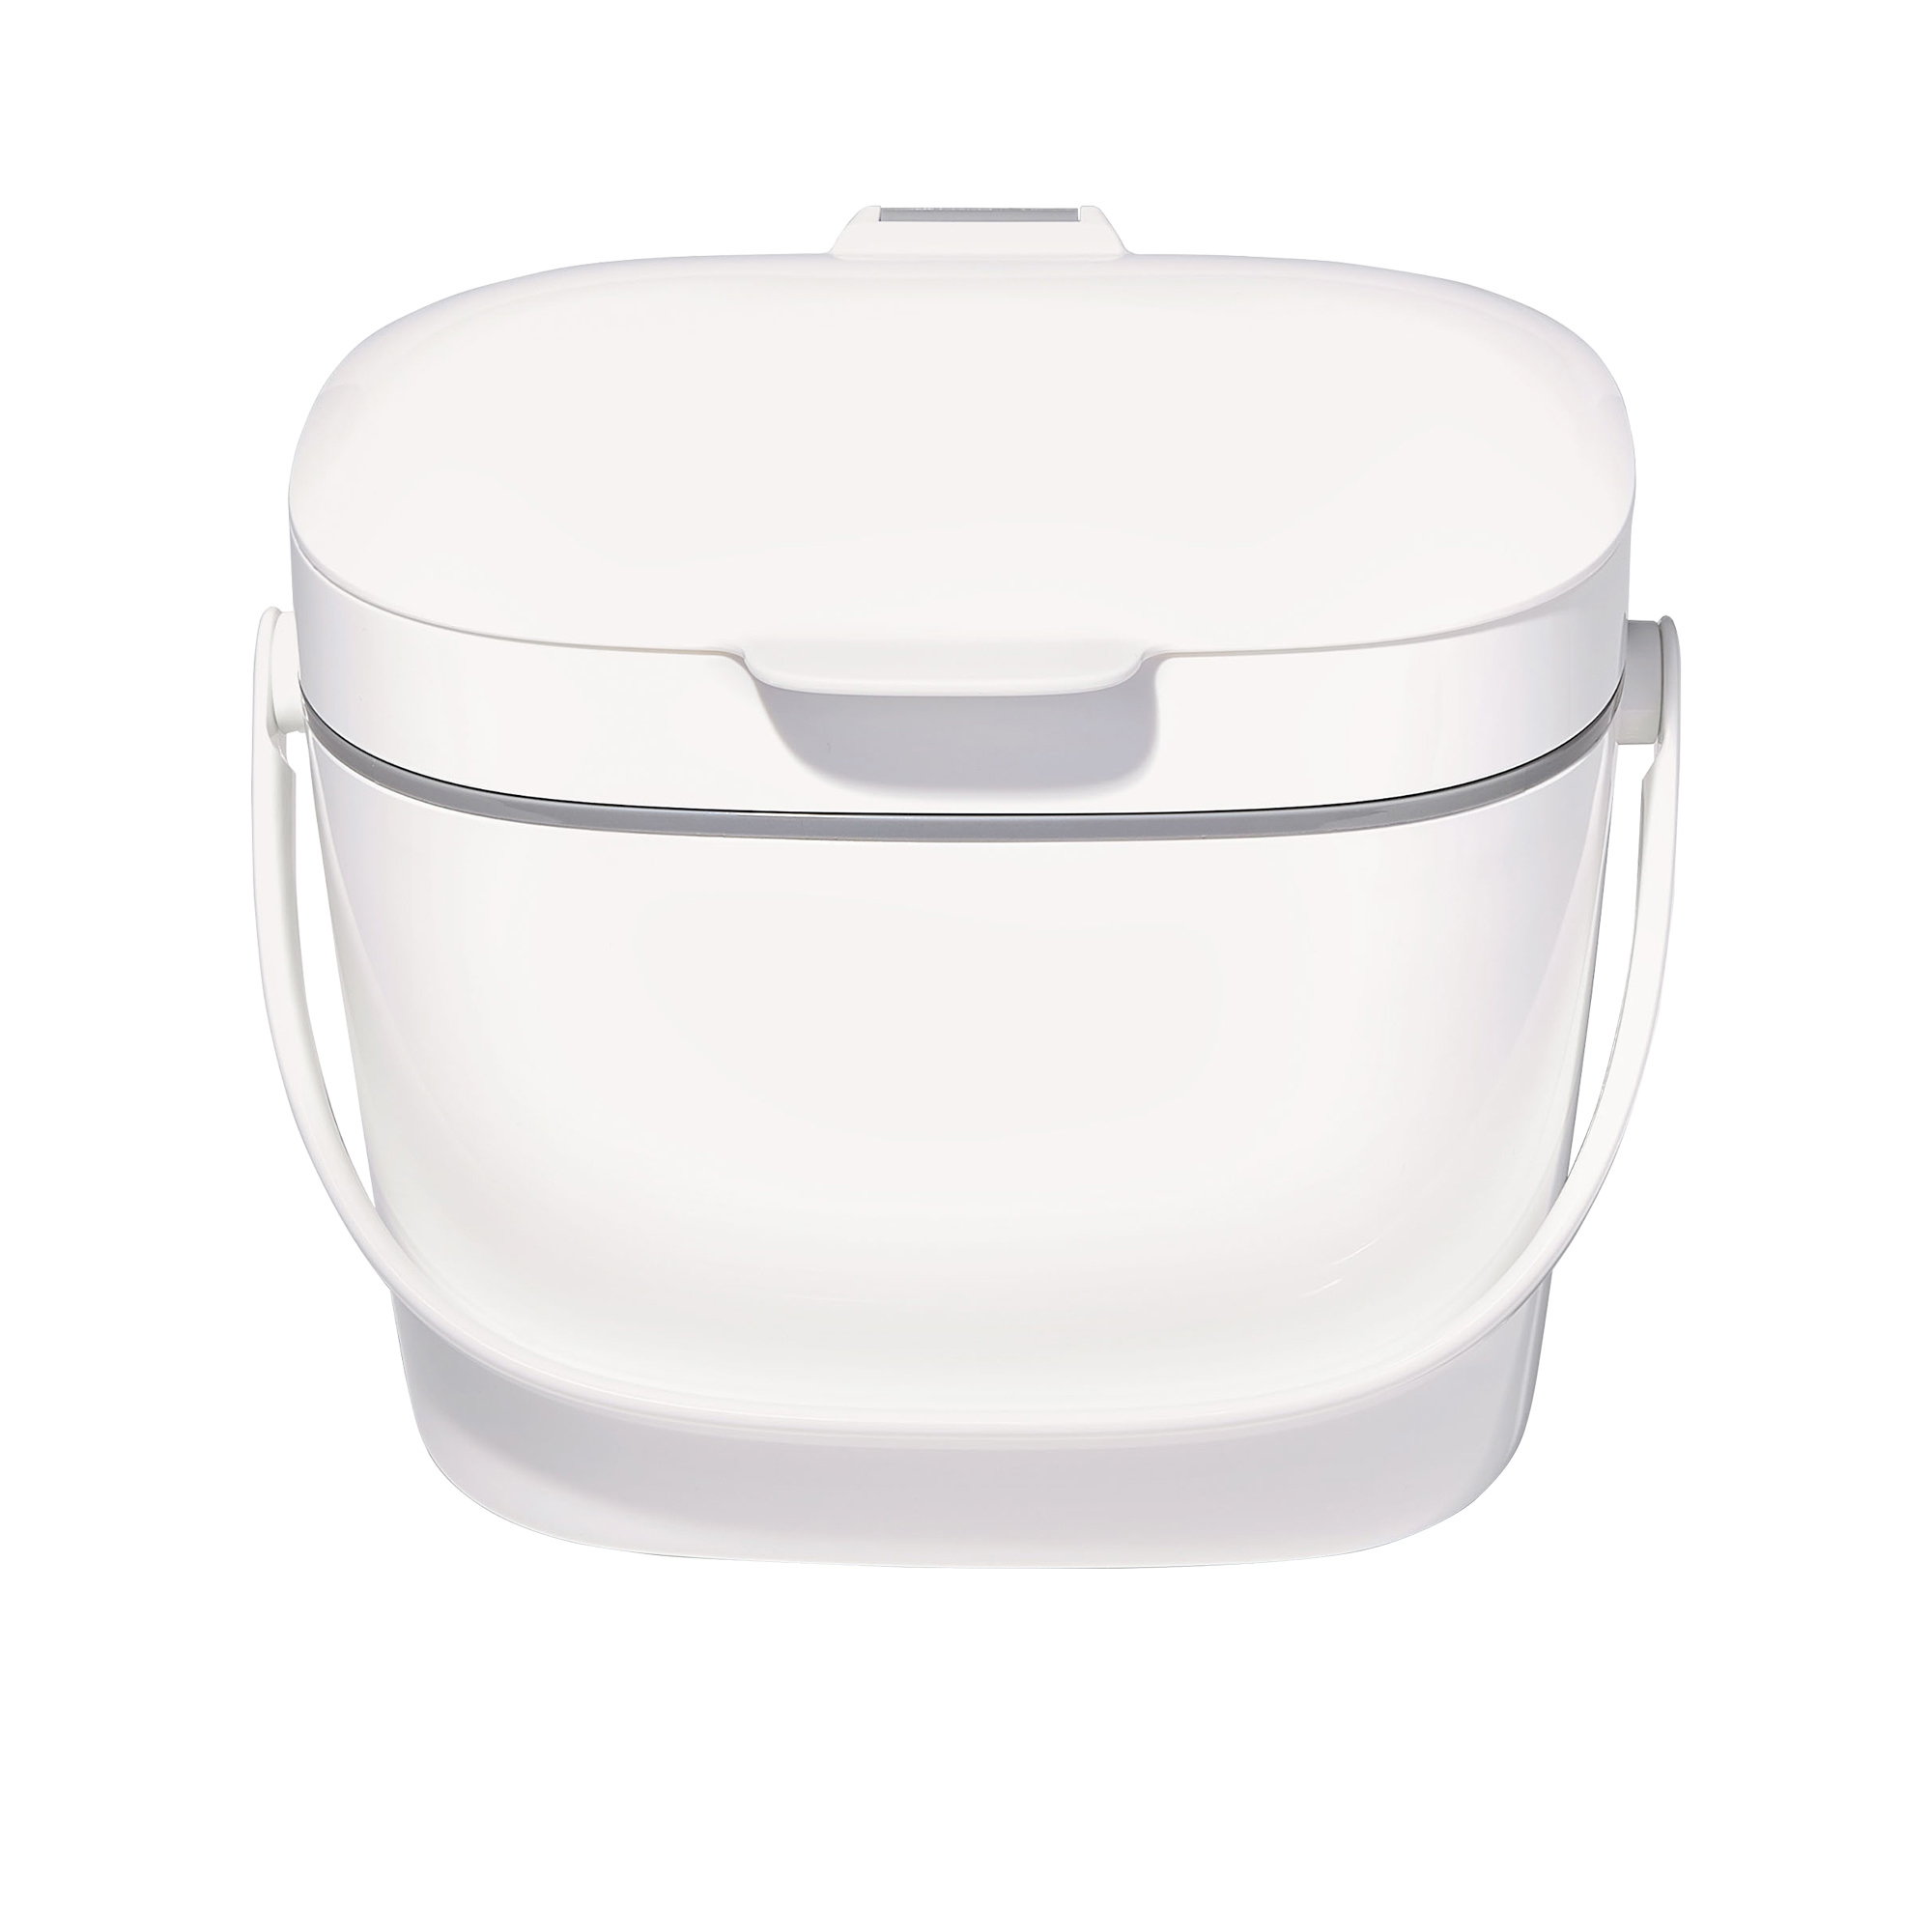 OXO Good Grips Easy Clean Compost Bin 6.6L White Image 1